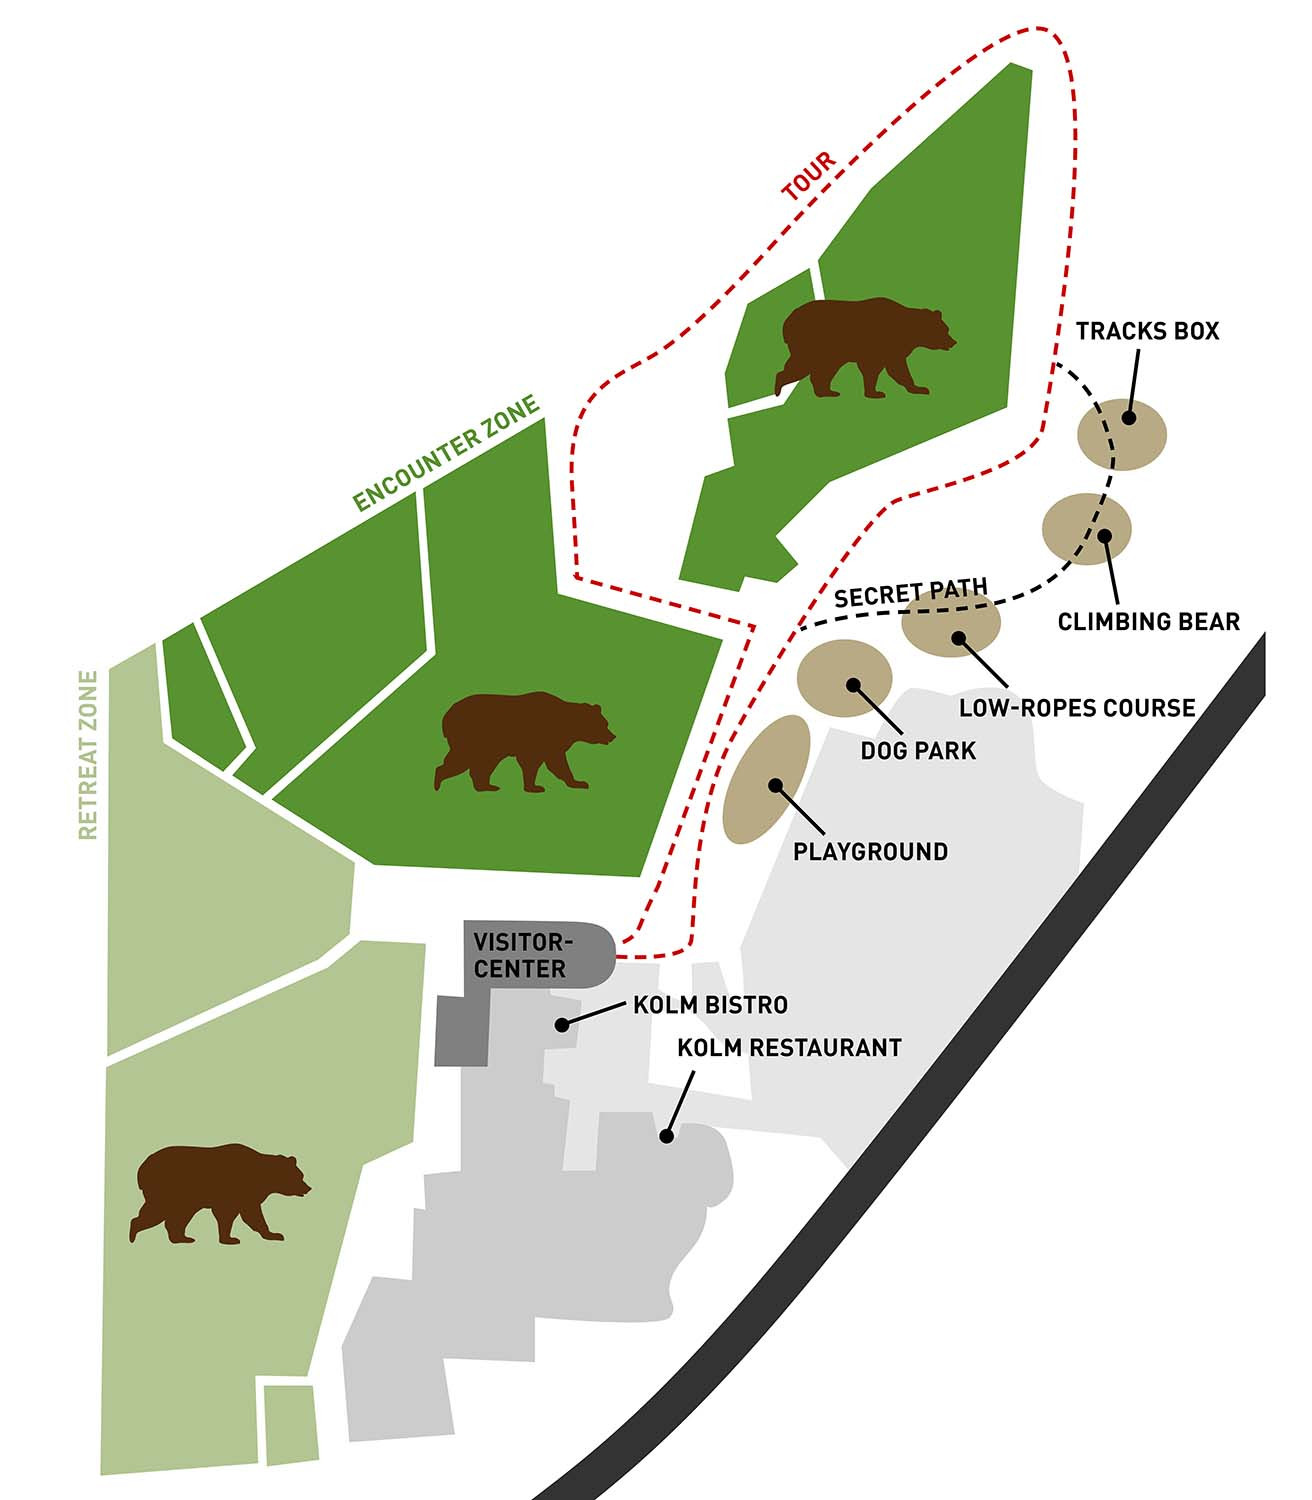 Overview plan of BEAR SANCTUARY Arbesbach